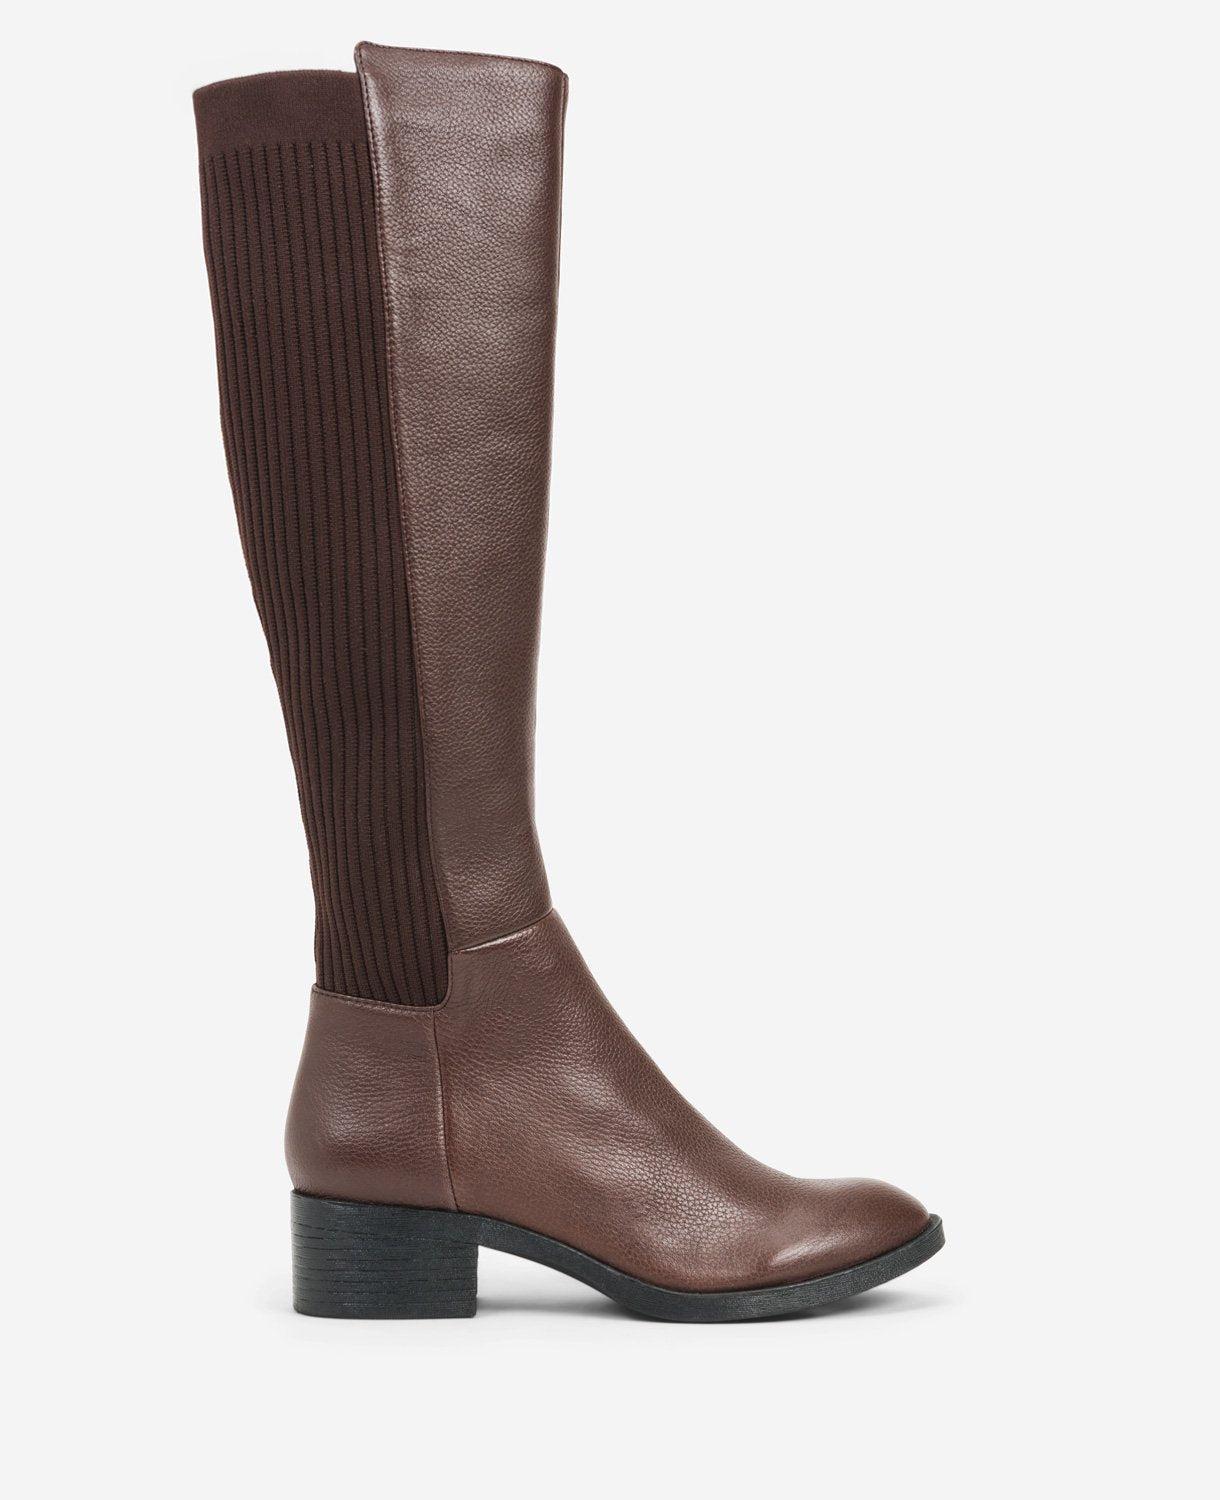 Kenneth Cole New York Levon Boot (Chocolate Leather) Women's Zip Boots Product Image